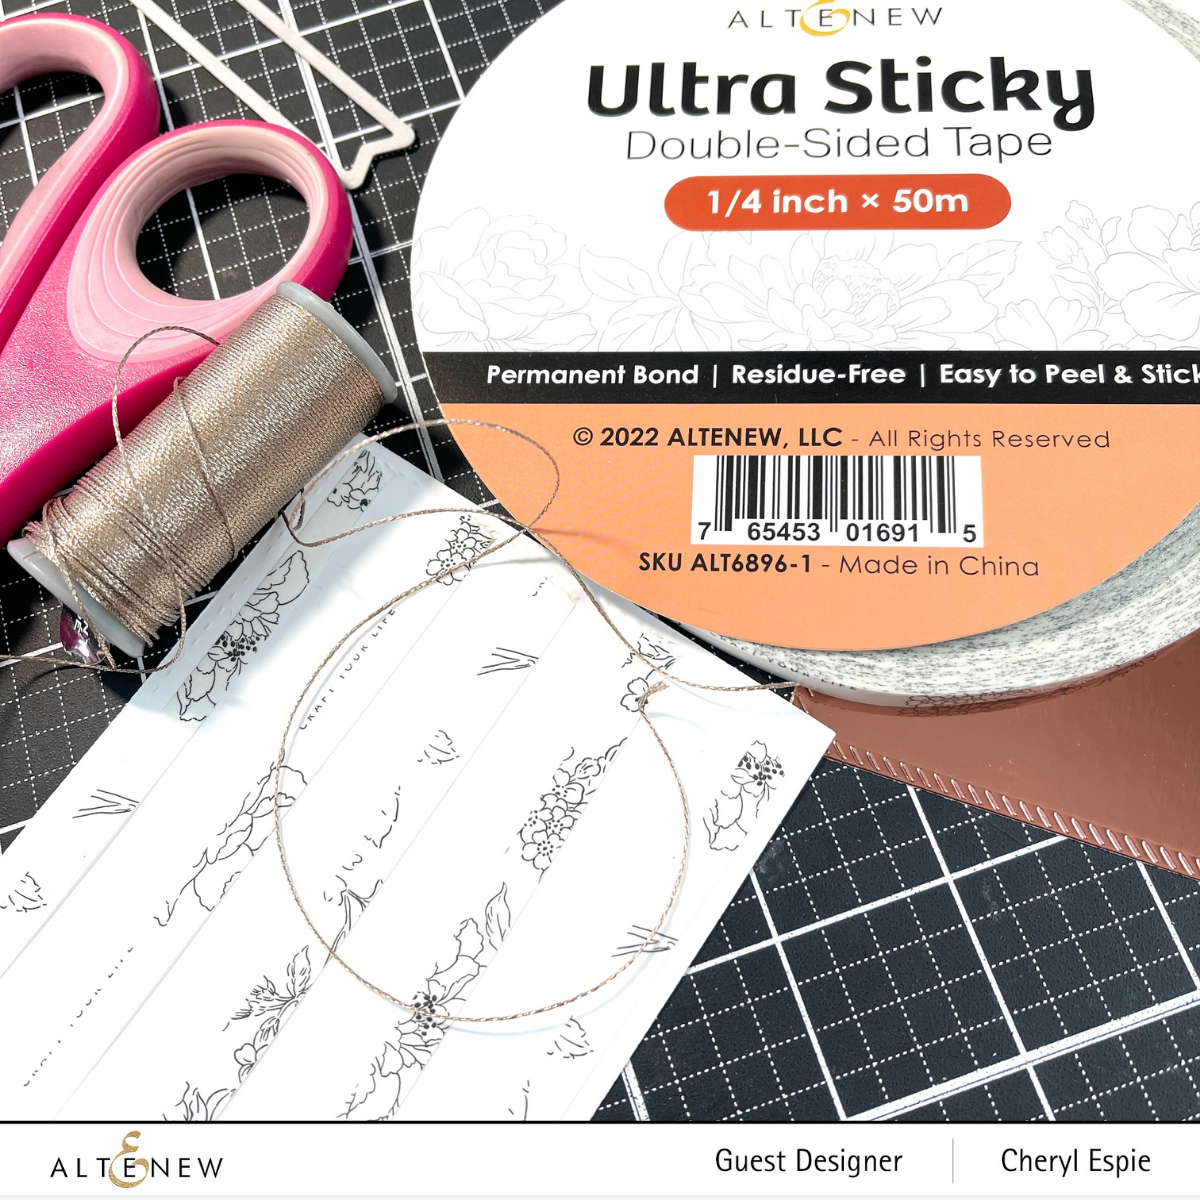 Adhesives Ultra Sticky Double Sided Tape (1/4 inch × 50m)